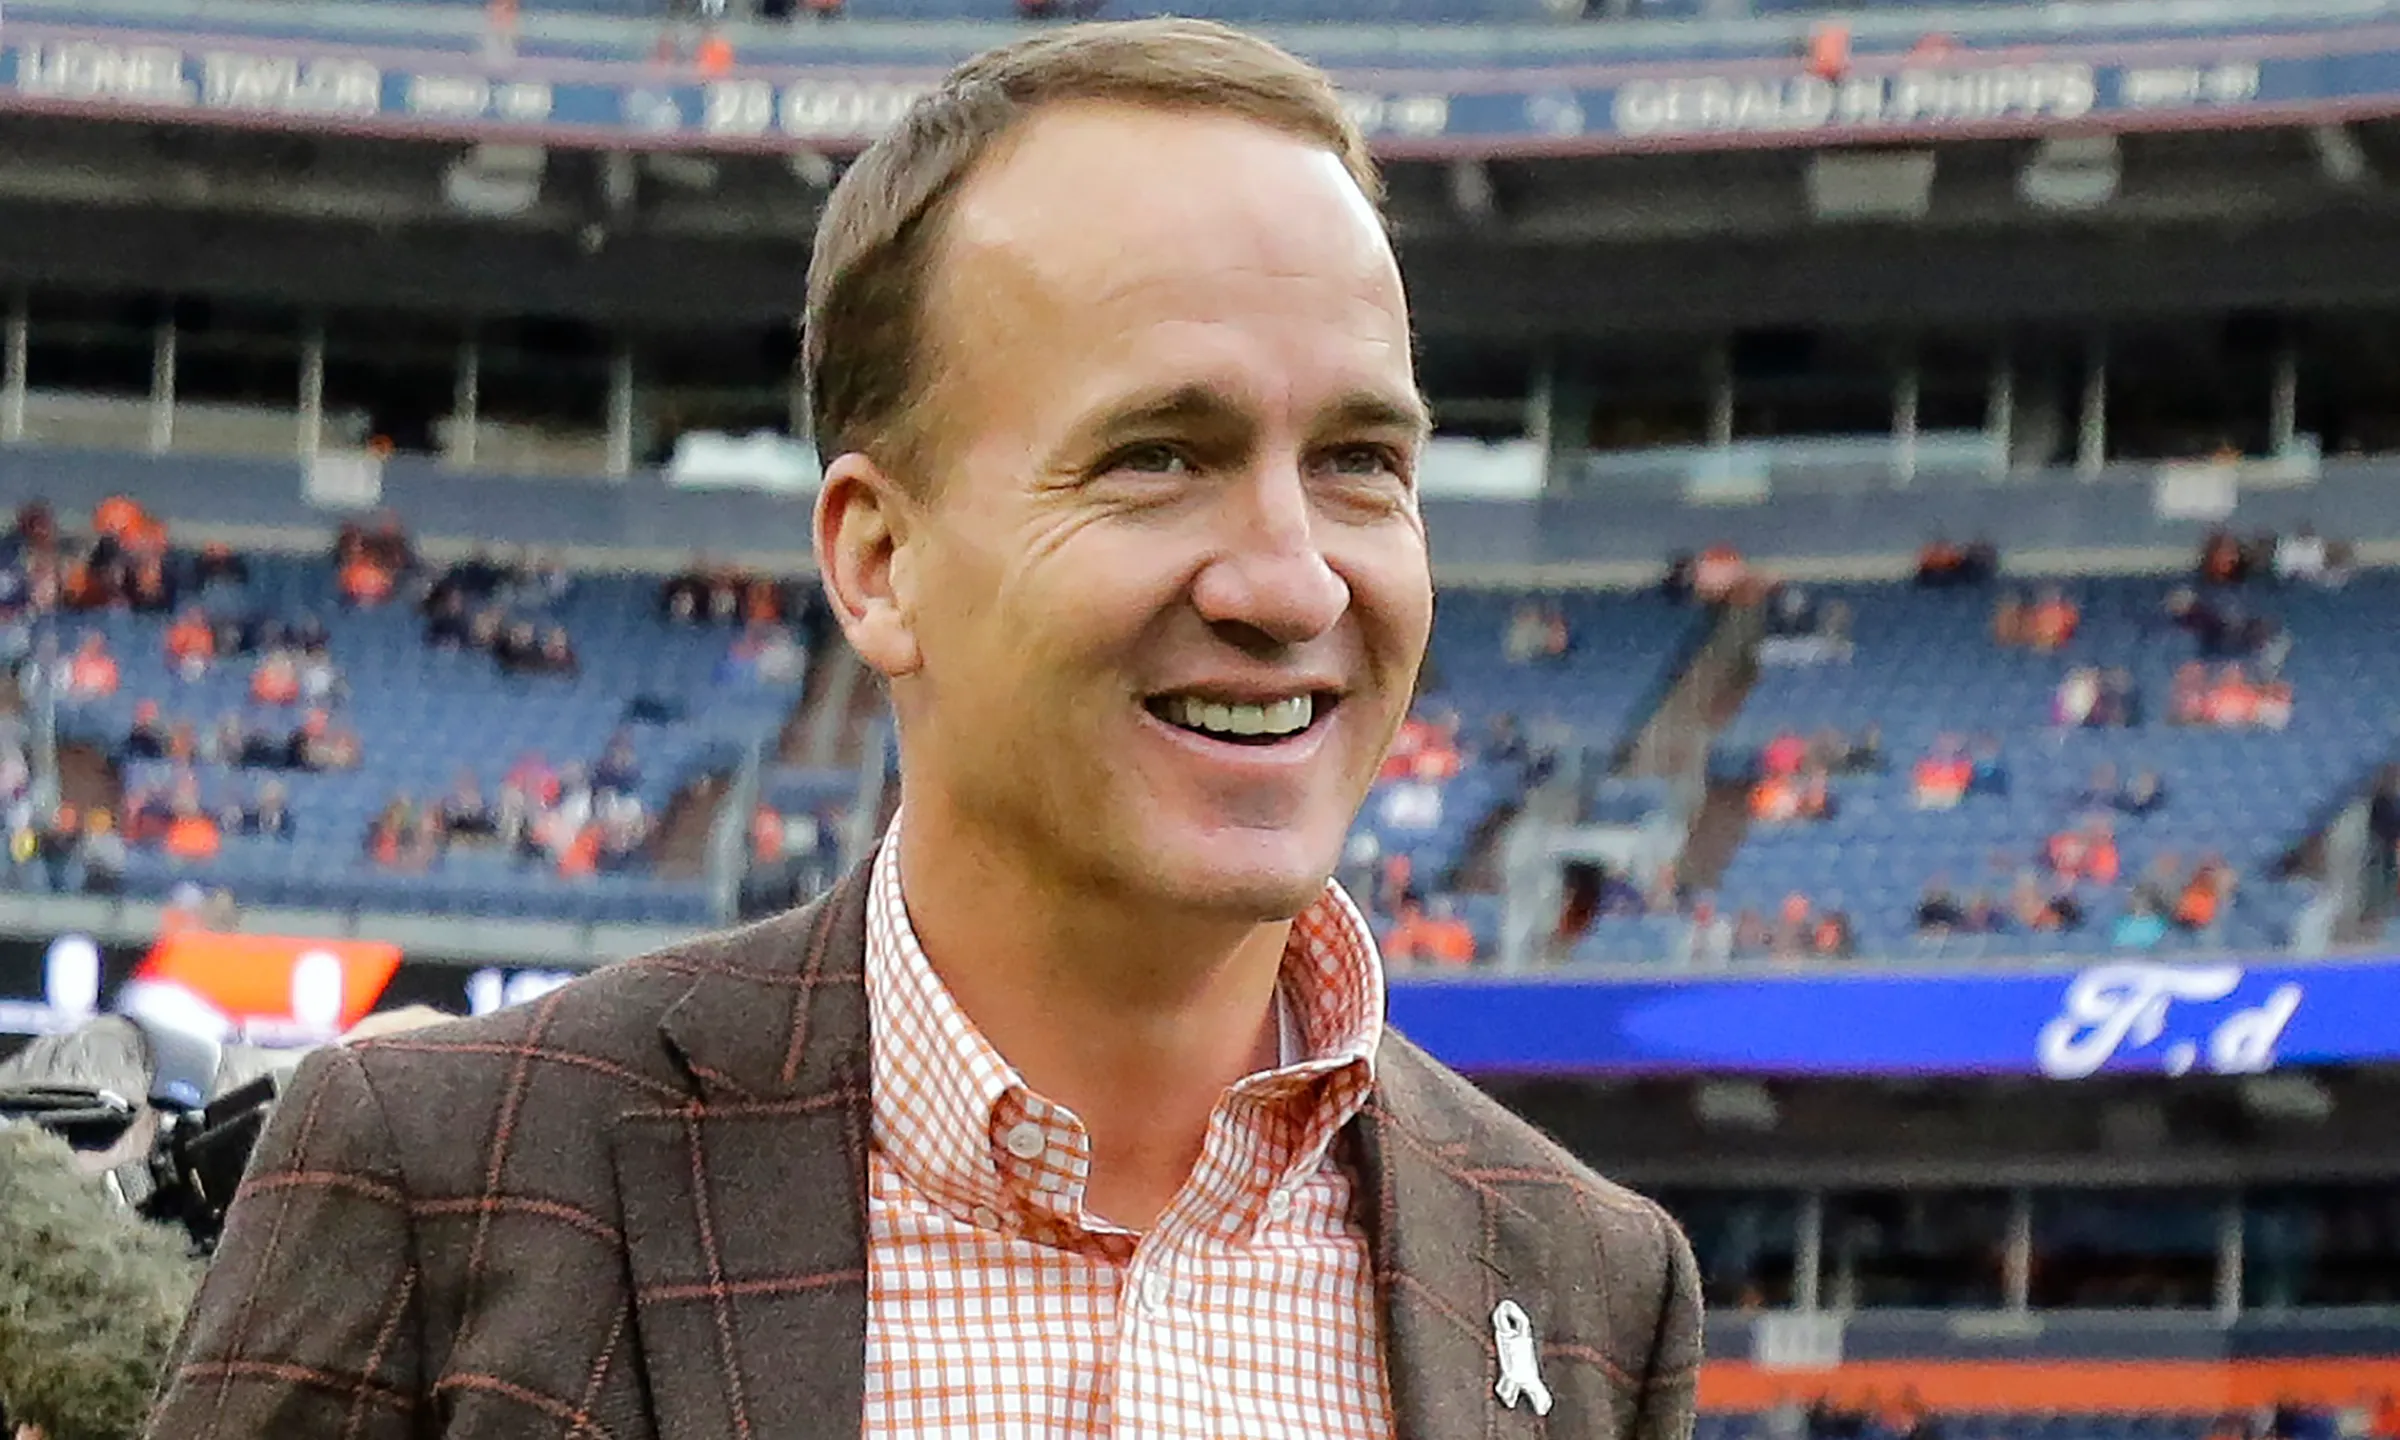 NFL News: Peyton Manning Says Denver Broncos Keenly Interested In J.J. McCarthy, Can They Get Him Amid Draft Capital Woes?